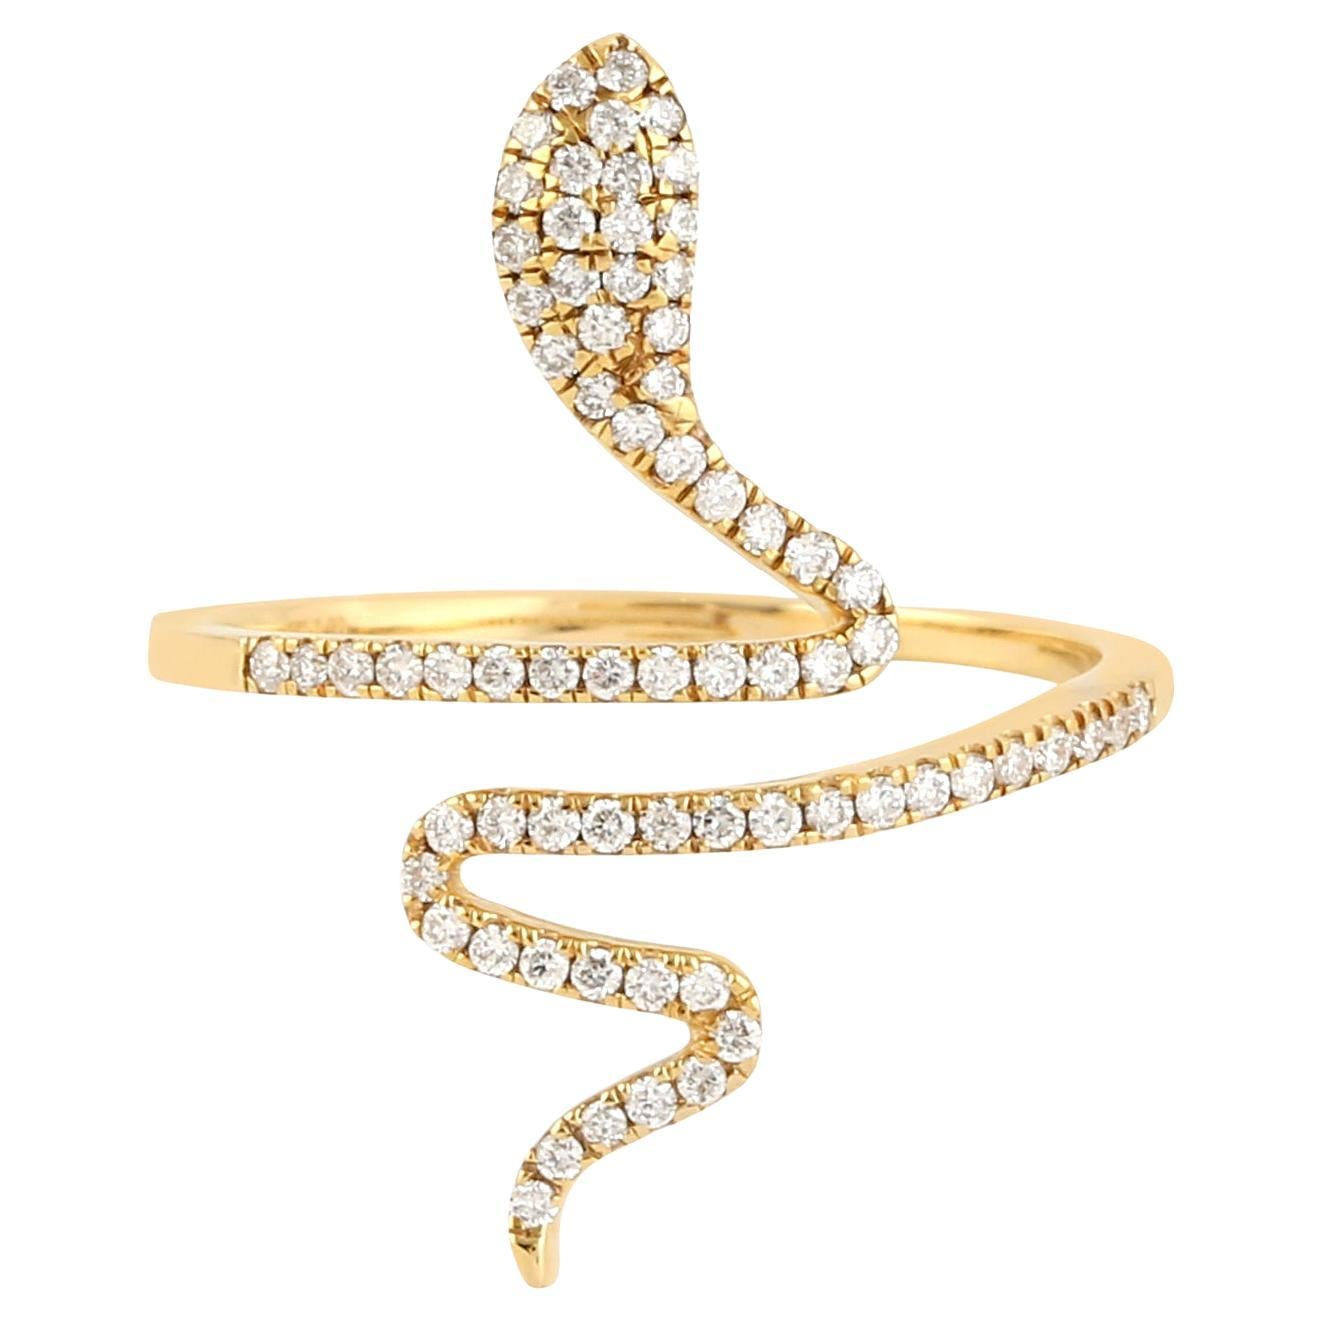 Snake Shaped Ring With Pave Diamonds Made In 18k Yellow Gold For Sale